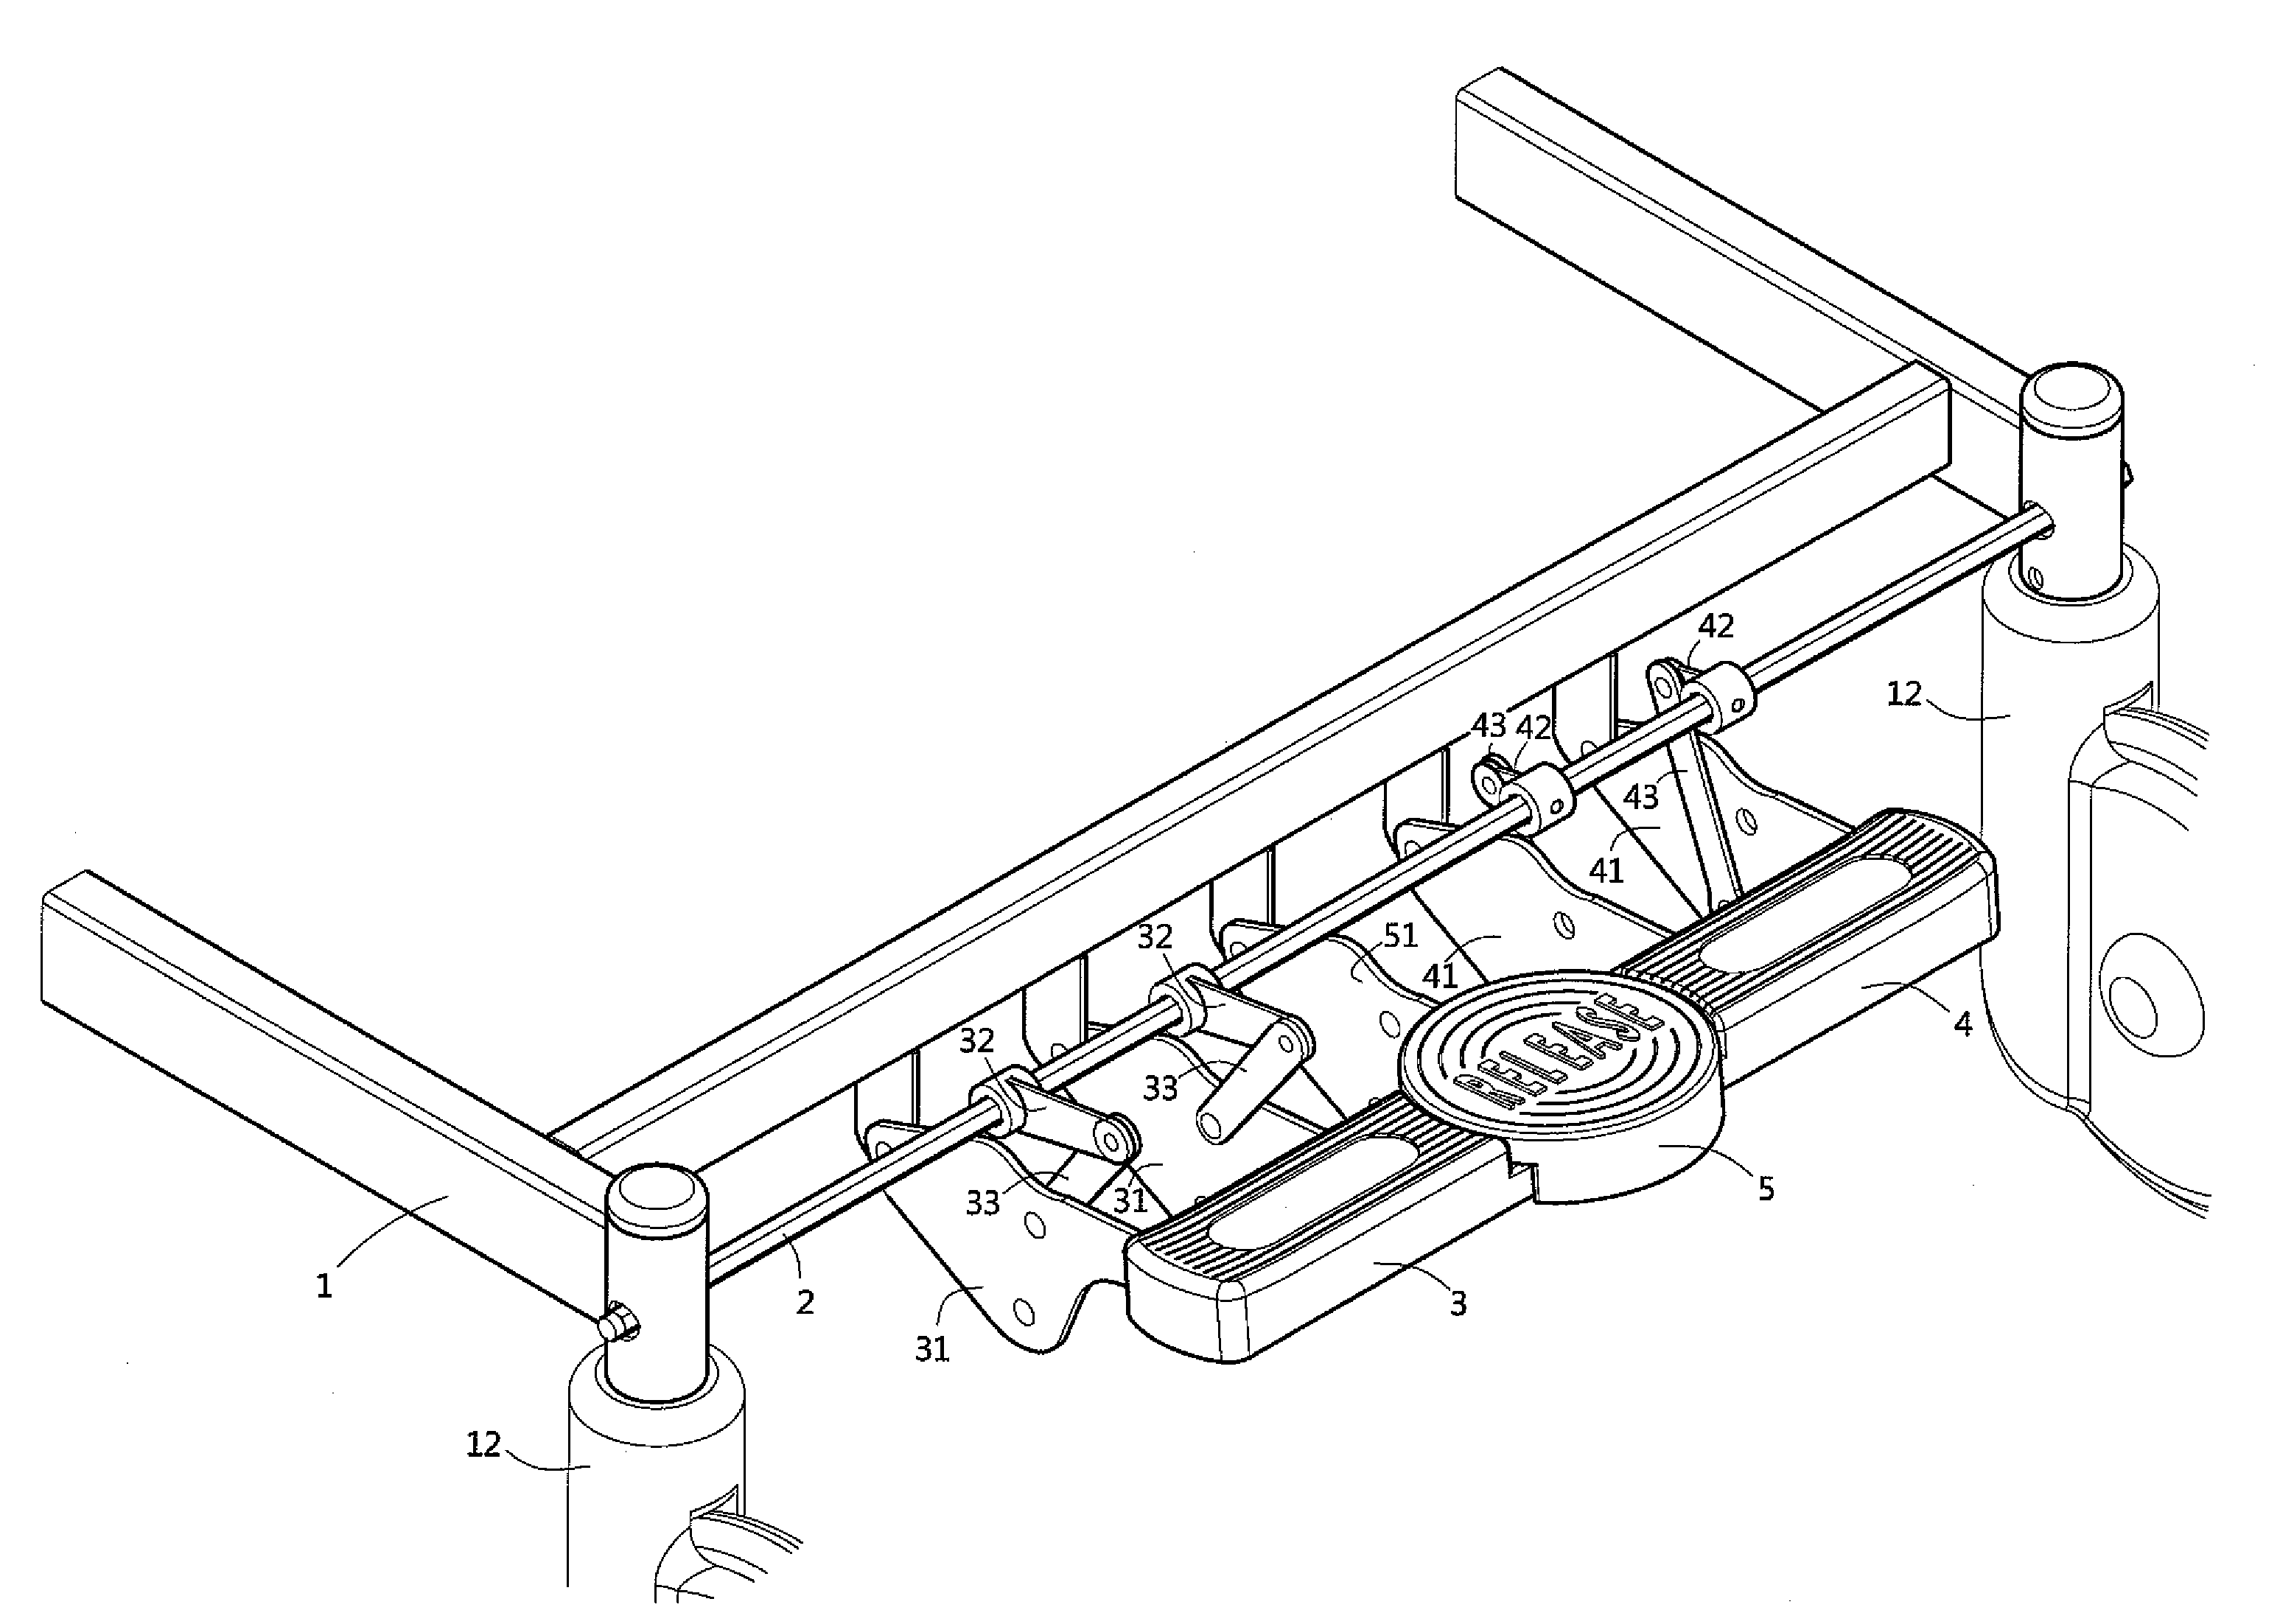 Motion control apparatus for hospital bed